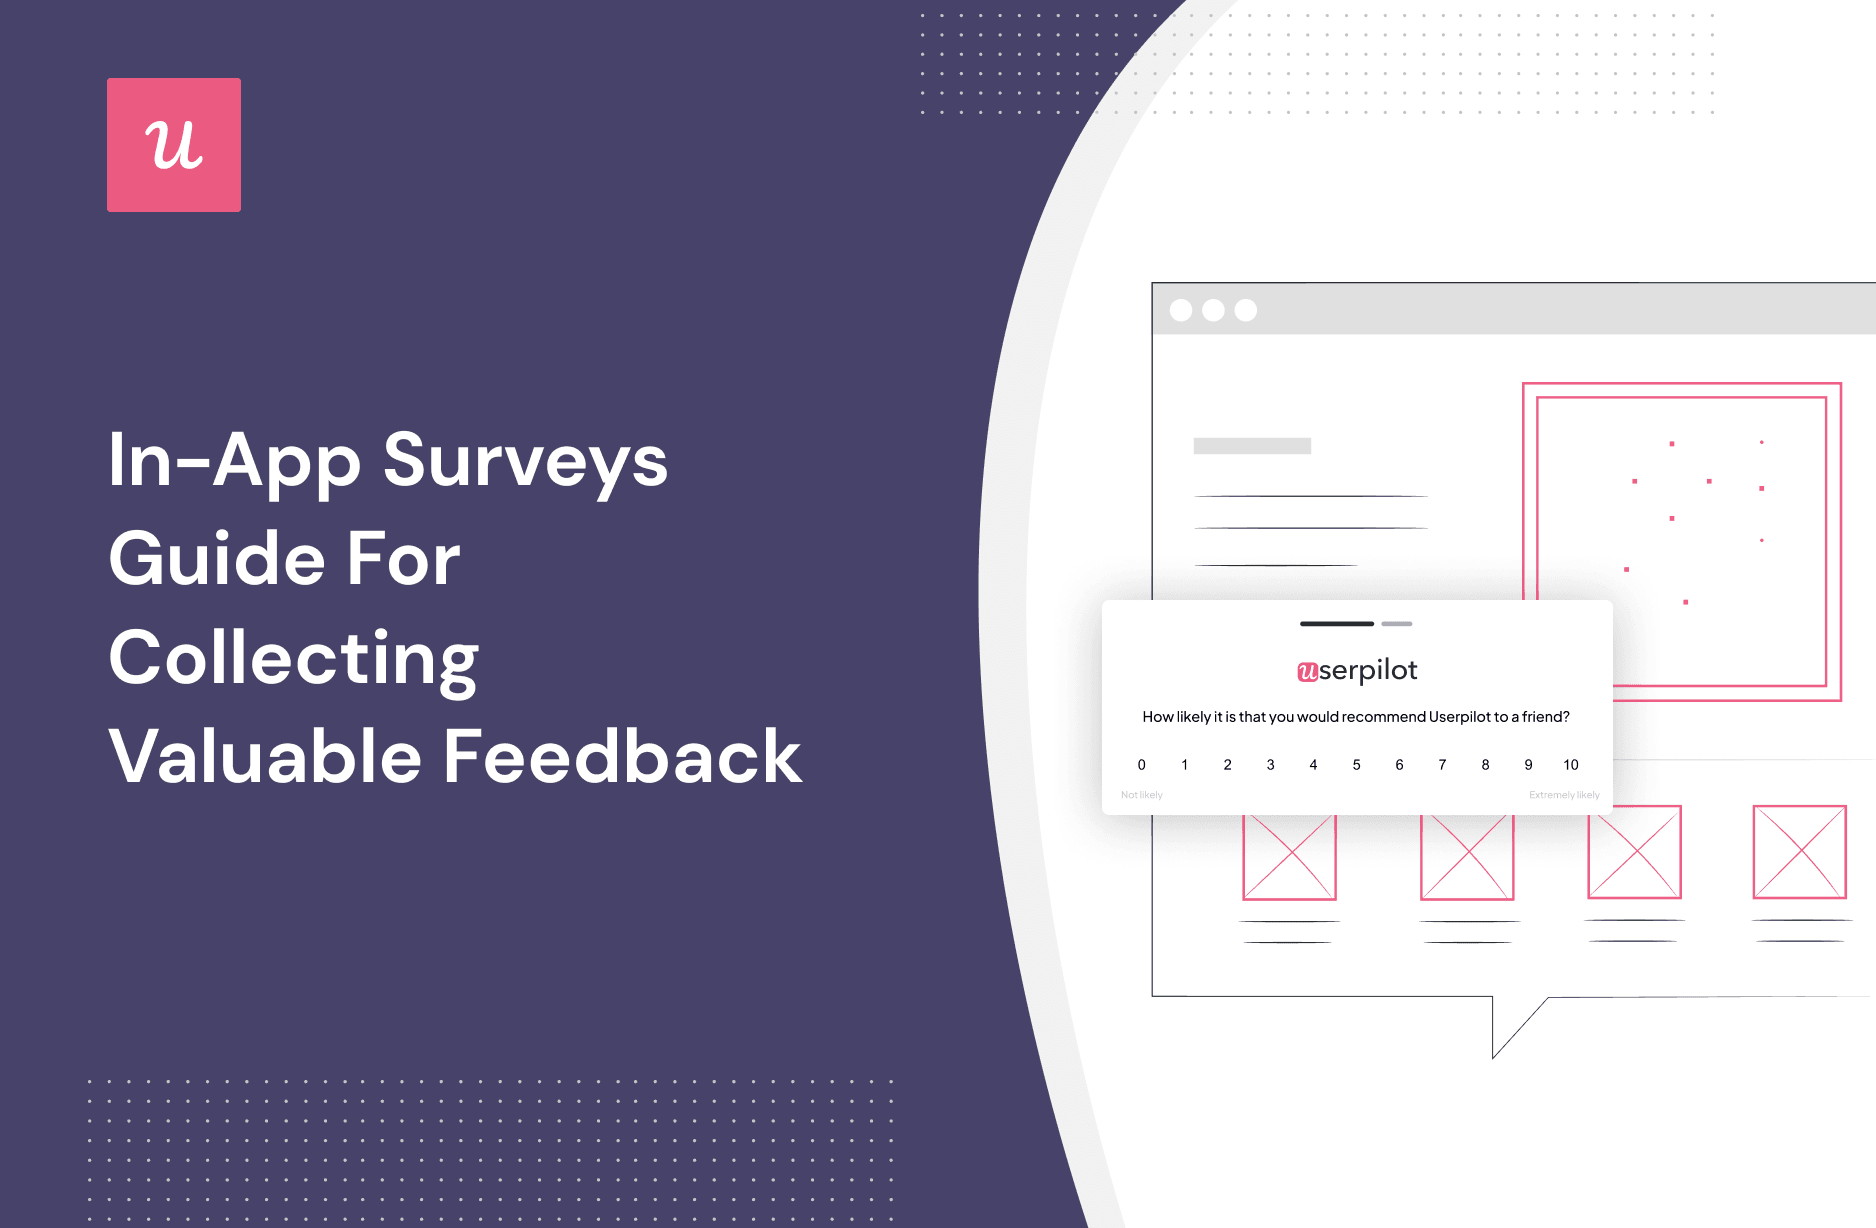 In-App Surveys Guide for Collecting Valuable Feedback cover